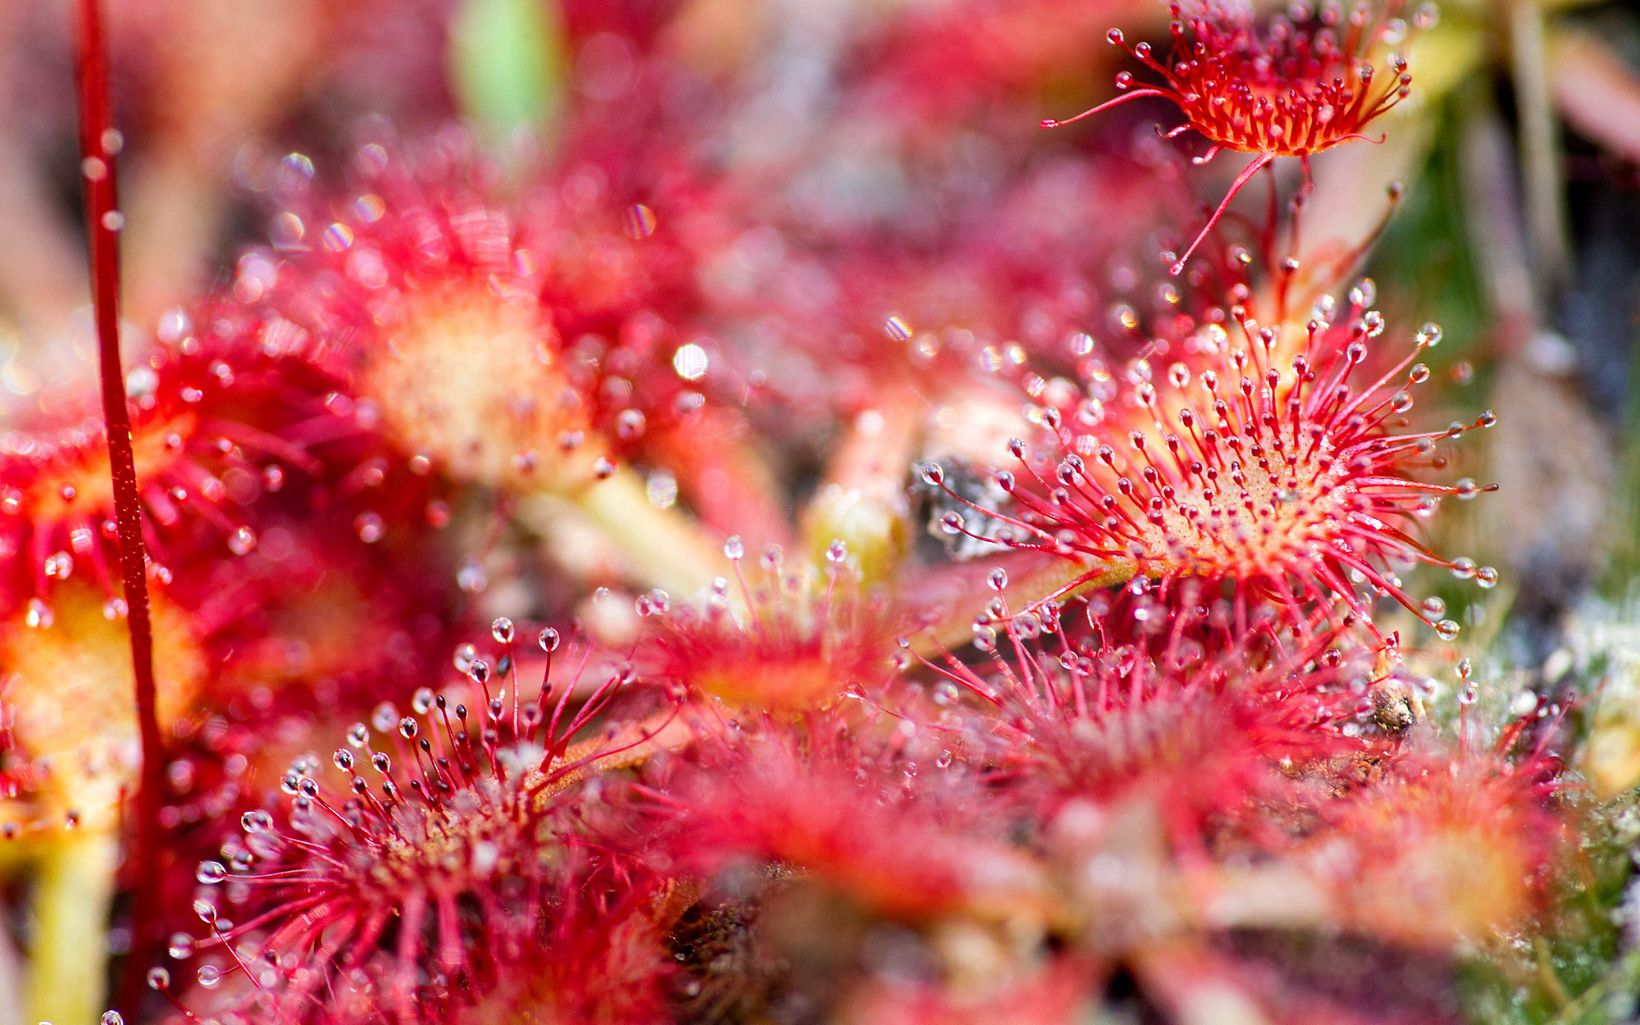 Closeup of sundews with club-shaped light green stems covered in tiny sticky red hairs.